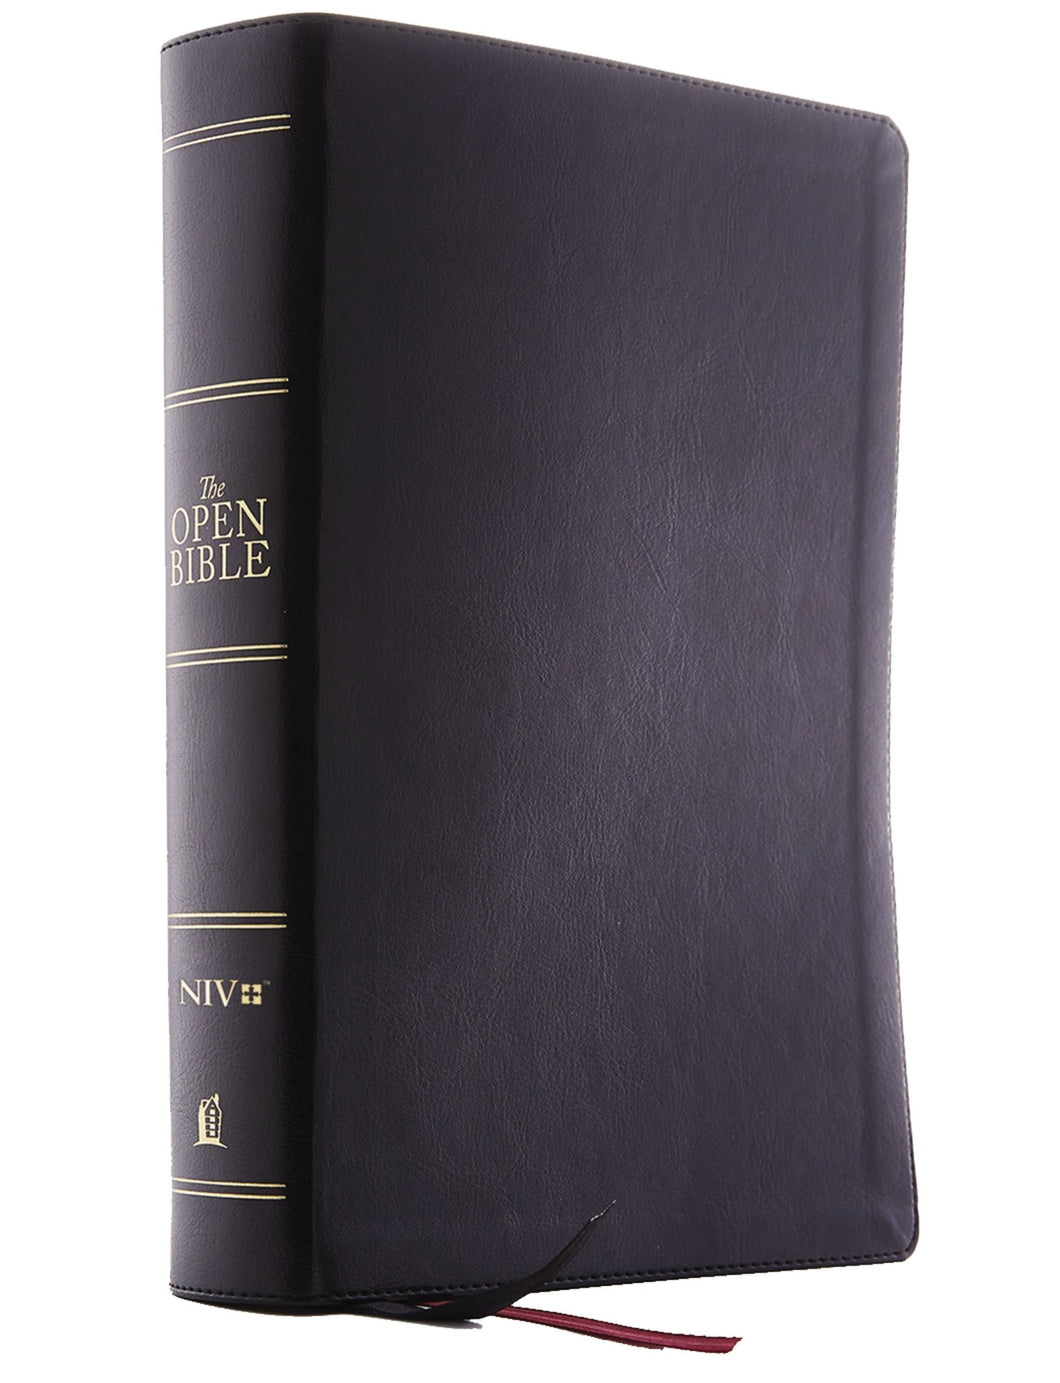 NIV The Open Bible (Comfort Print)-Black Leathersoft Indexed